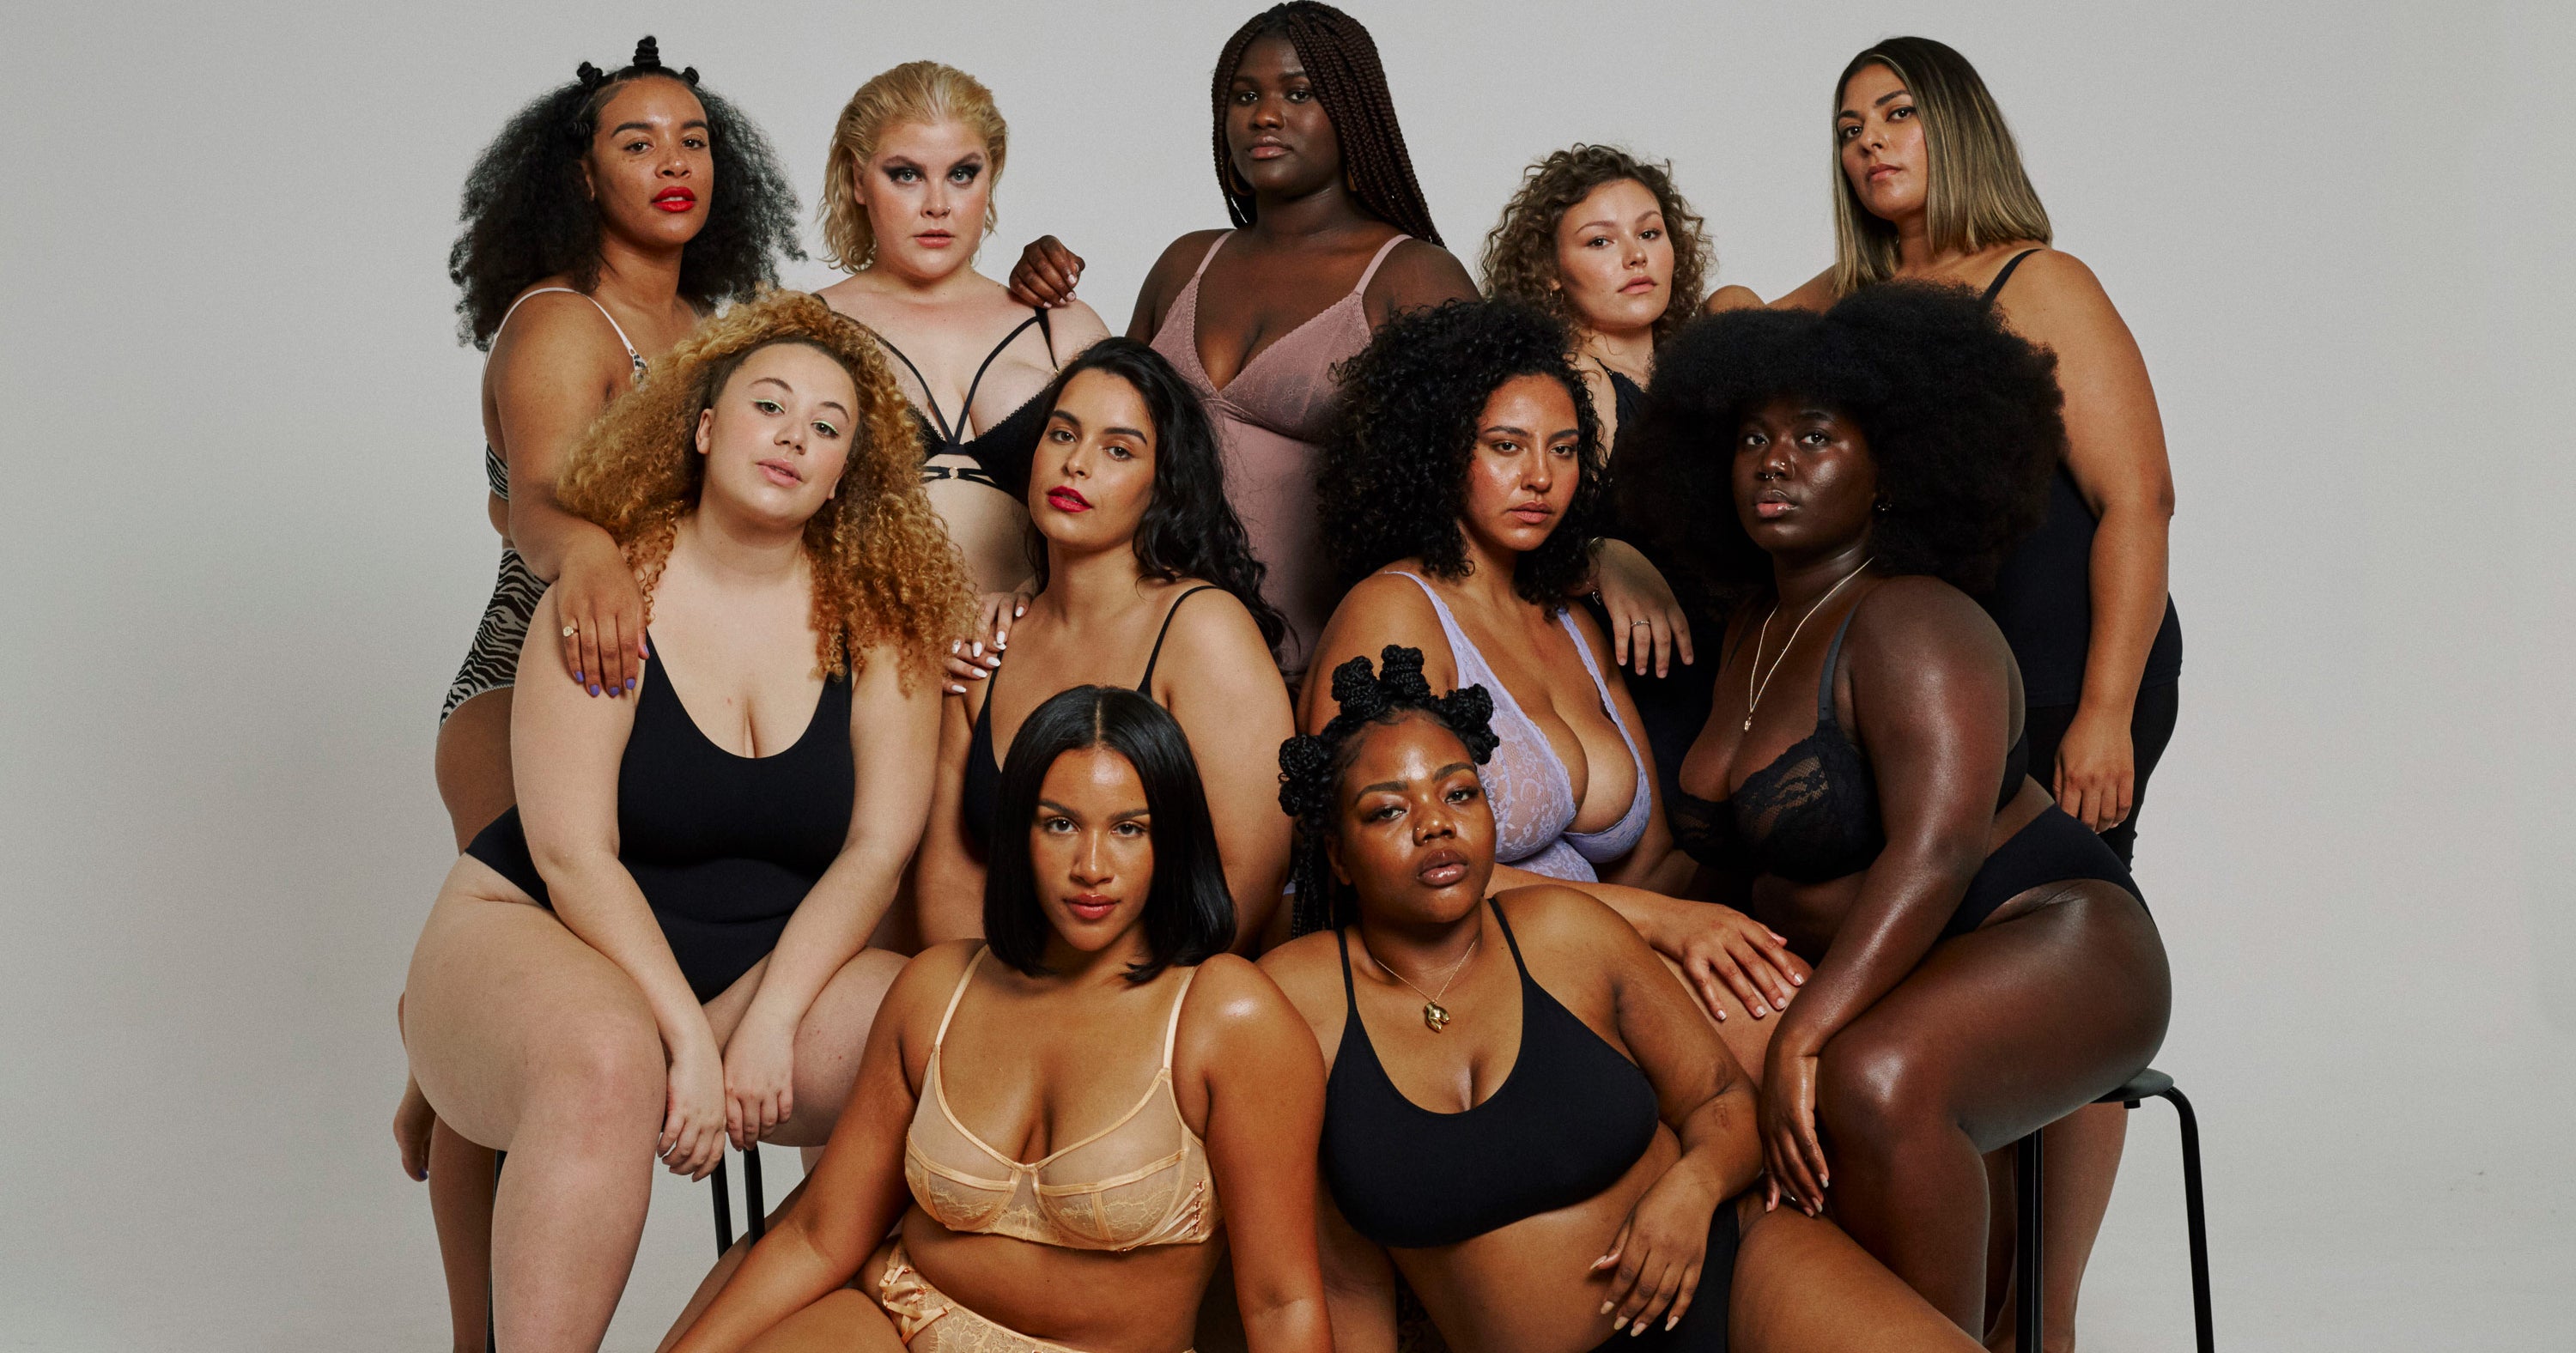 Plus Size Beach Group Nude - Brother Models Curve Board Celebrates Plus-Size Beauty